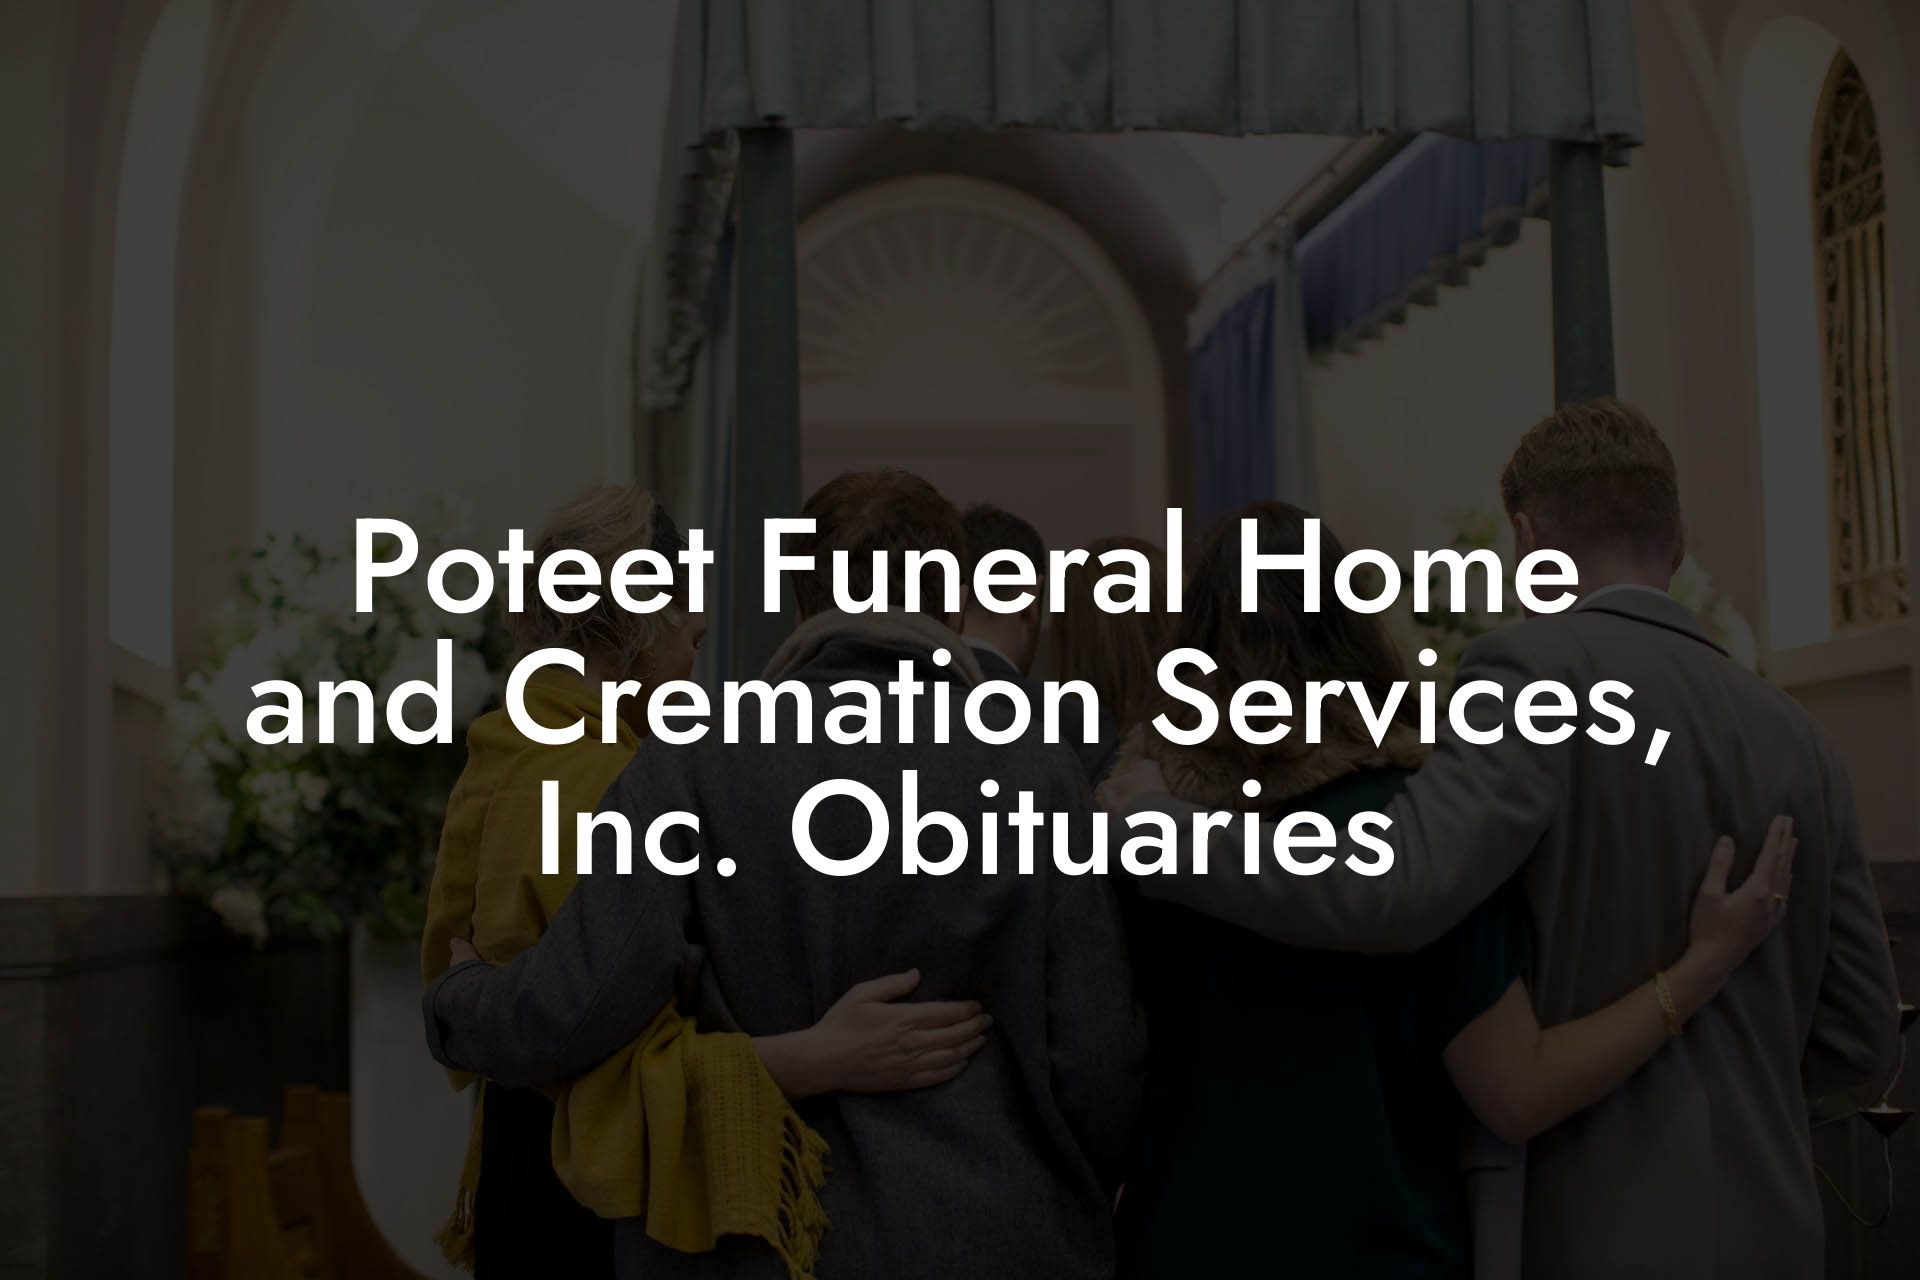 Poteet Funeral Home and Cremation Services, Inc. Obituaries